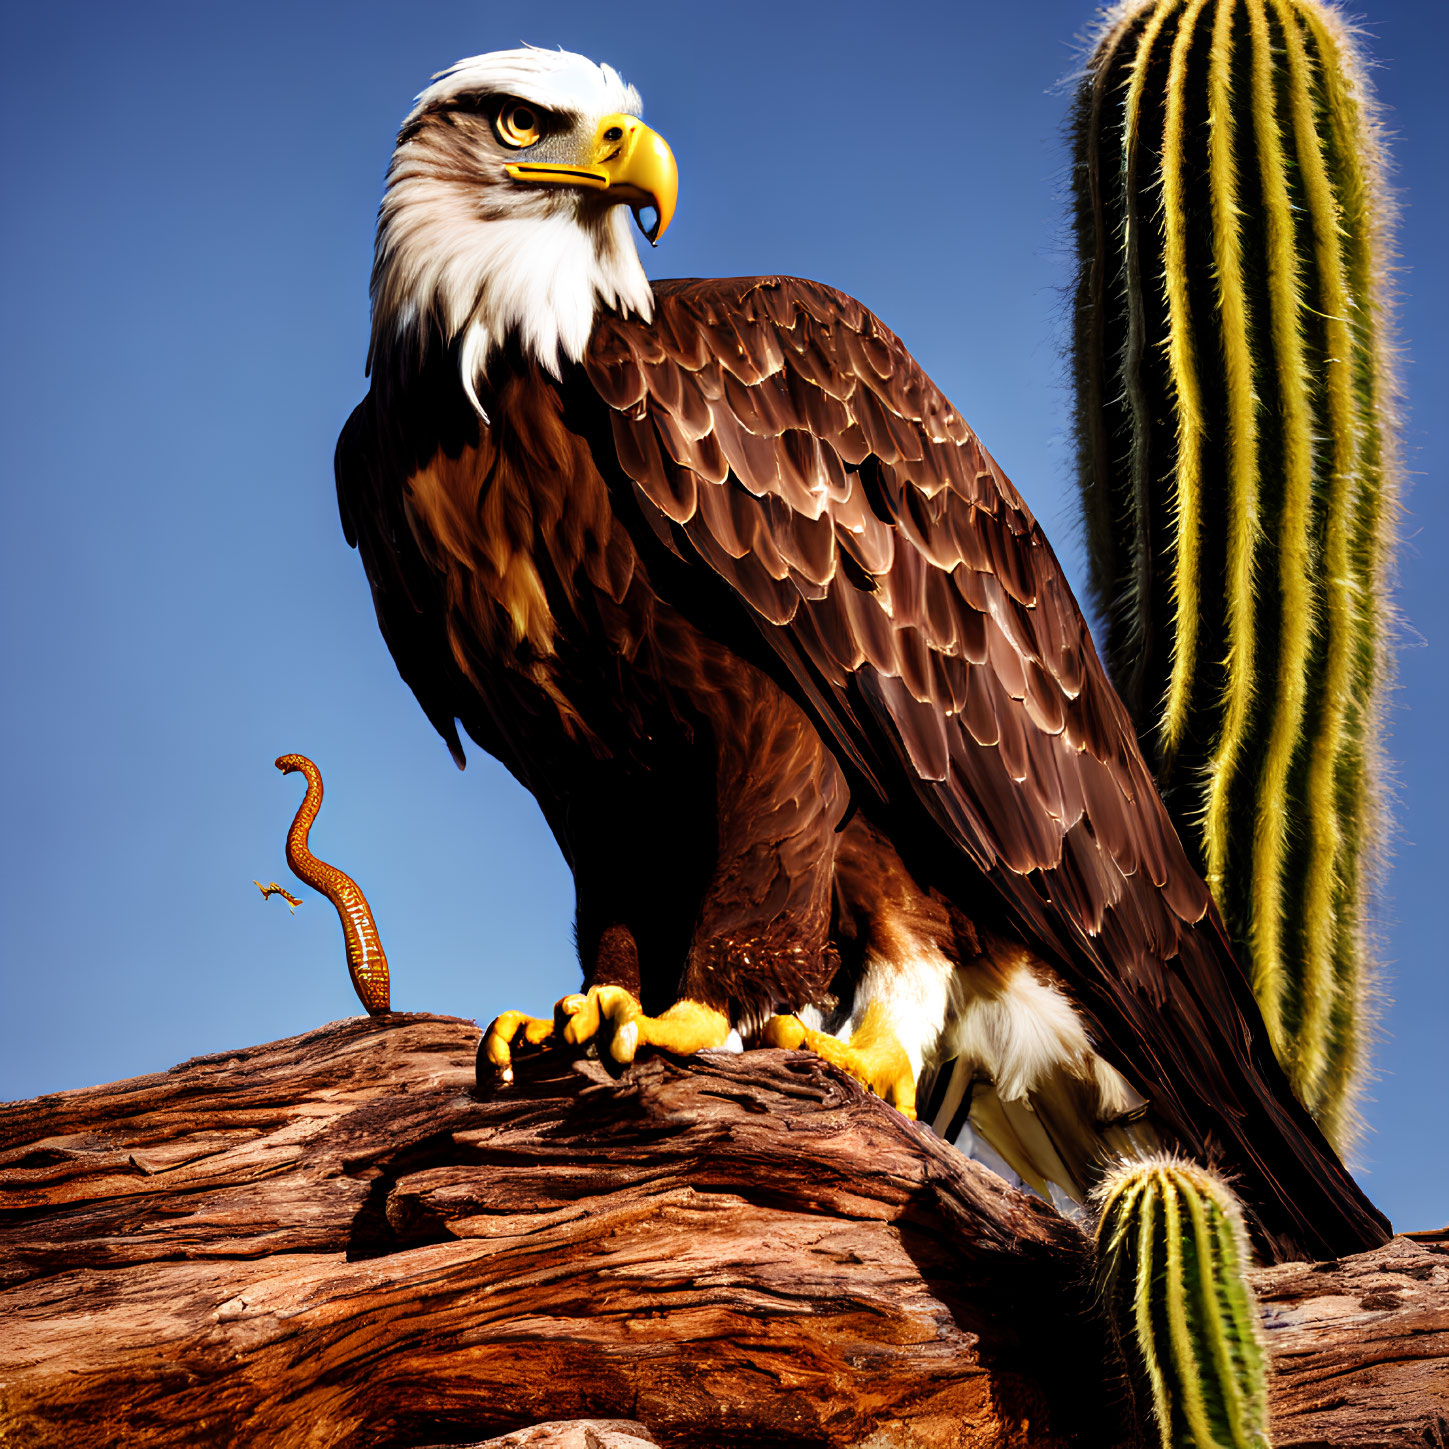 Bald eagle with snake on branch against blue sky and cactus